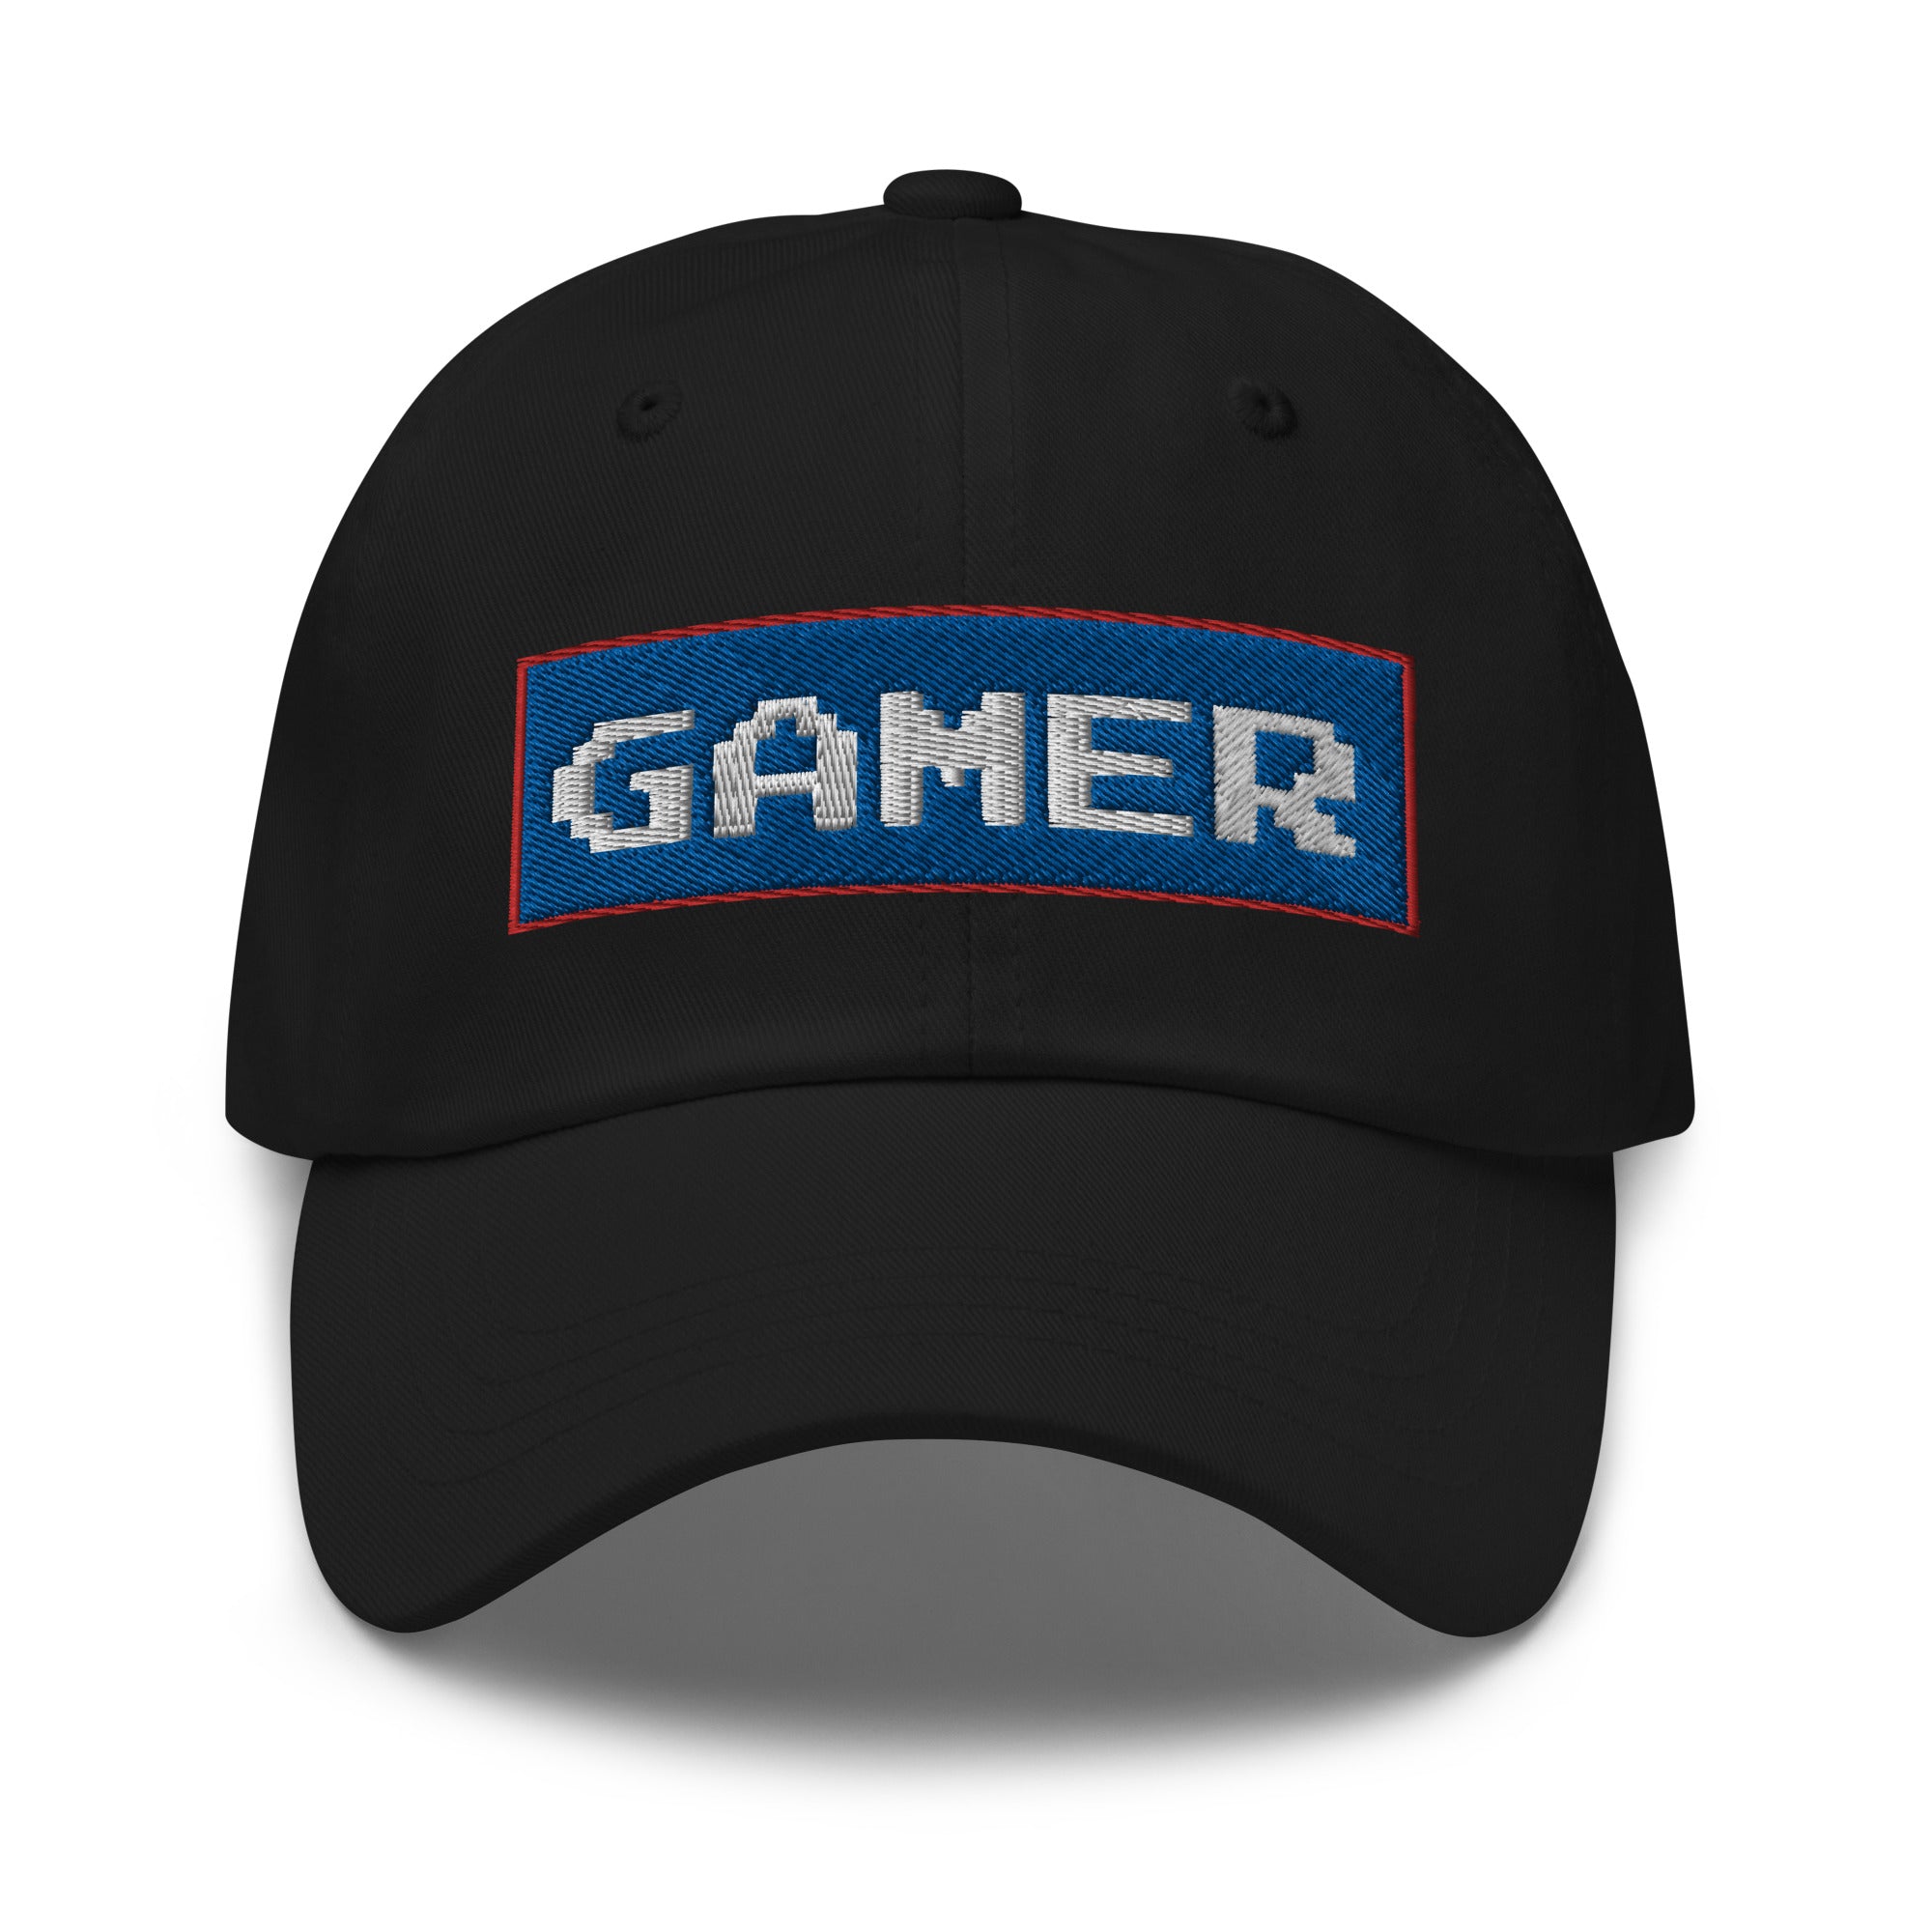 8 Bit Gamer Embroidered Baseball Cap Blue White 80's Retro Style Gaming Dad hat - Edge of Life Designs